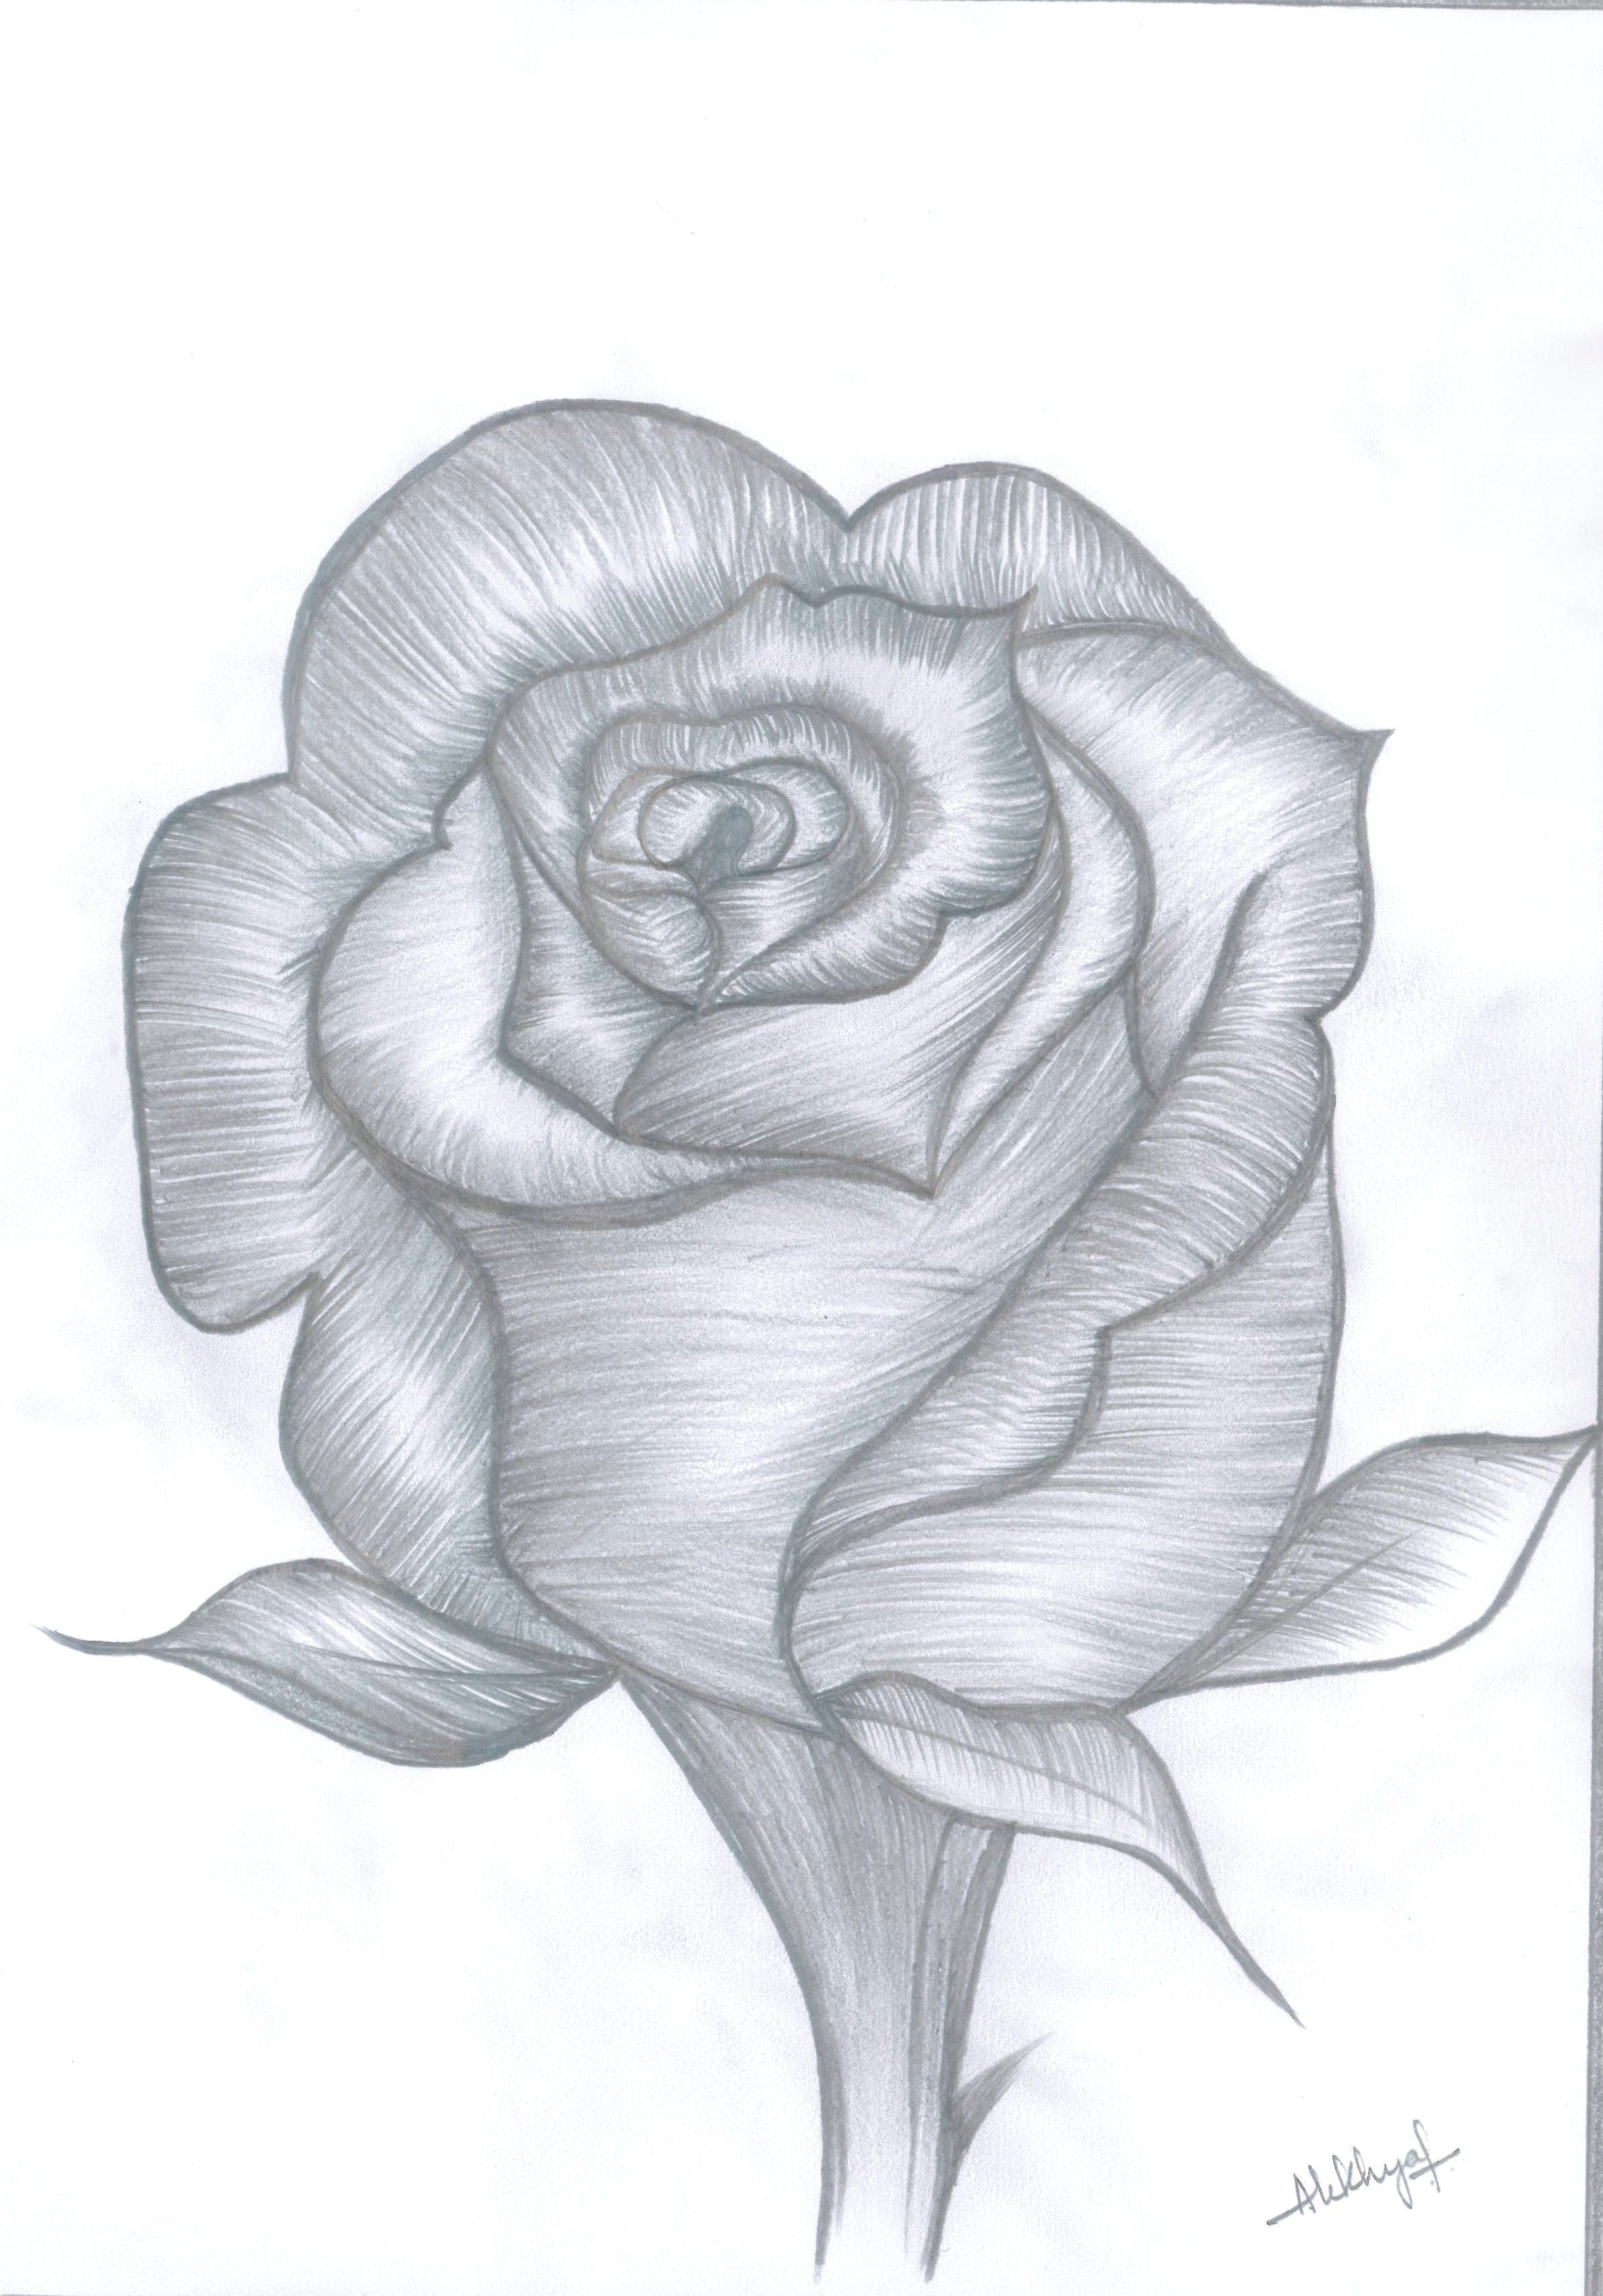 Sketch Of Rose for Drawing Rose Bud Drawings In 2018 Pinterest Draw Rose Buds and Pencil